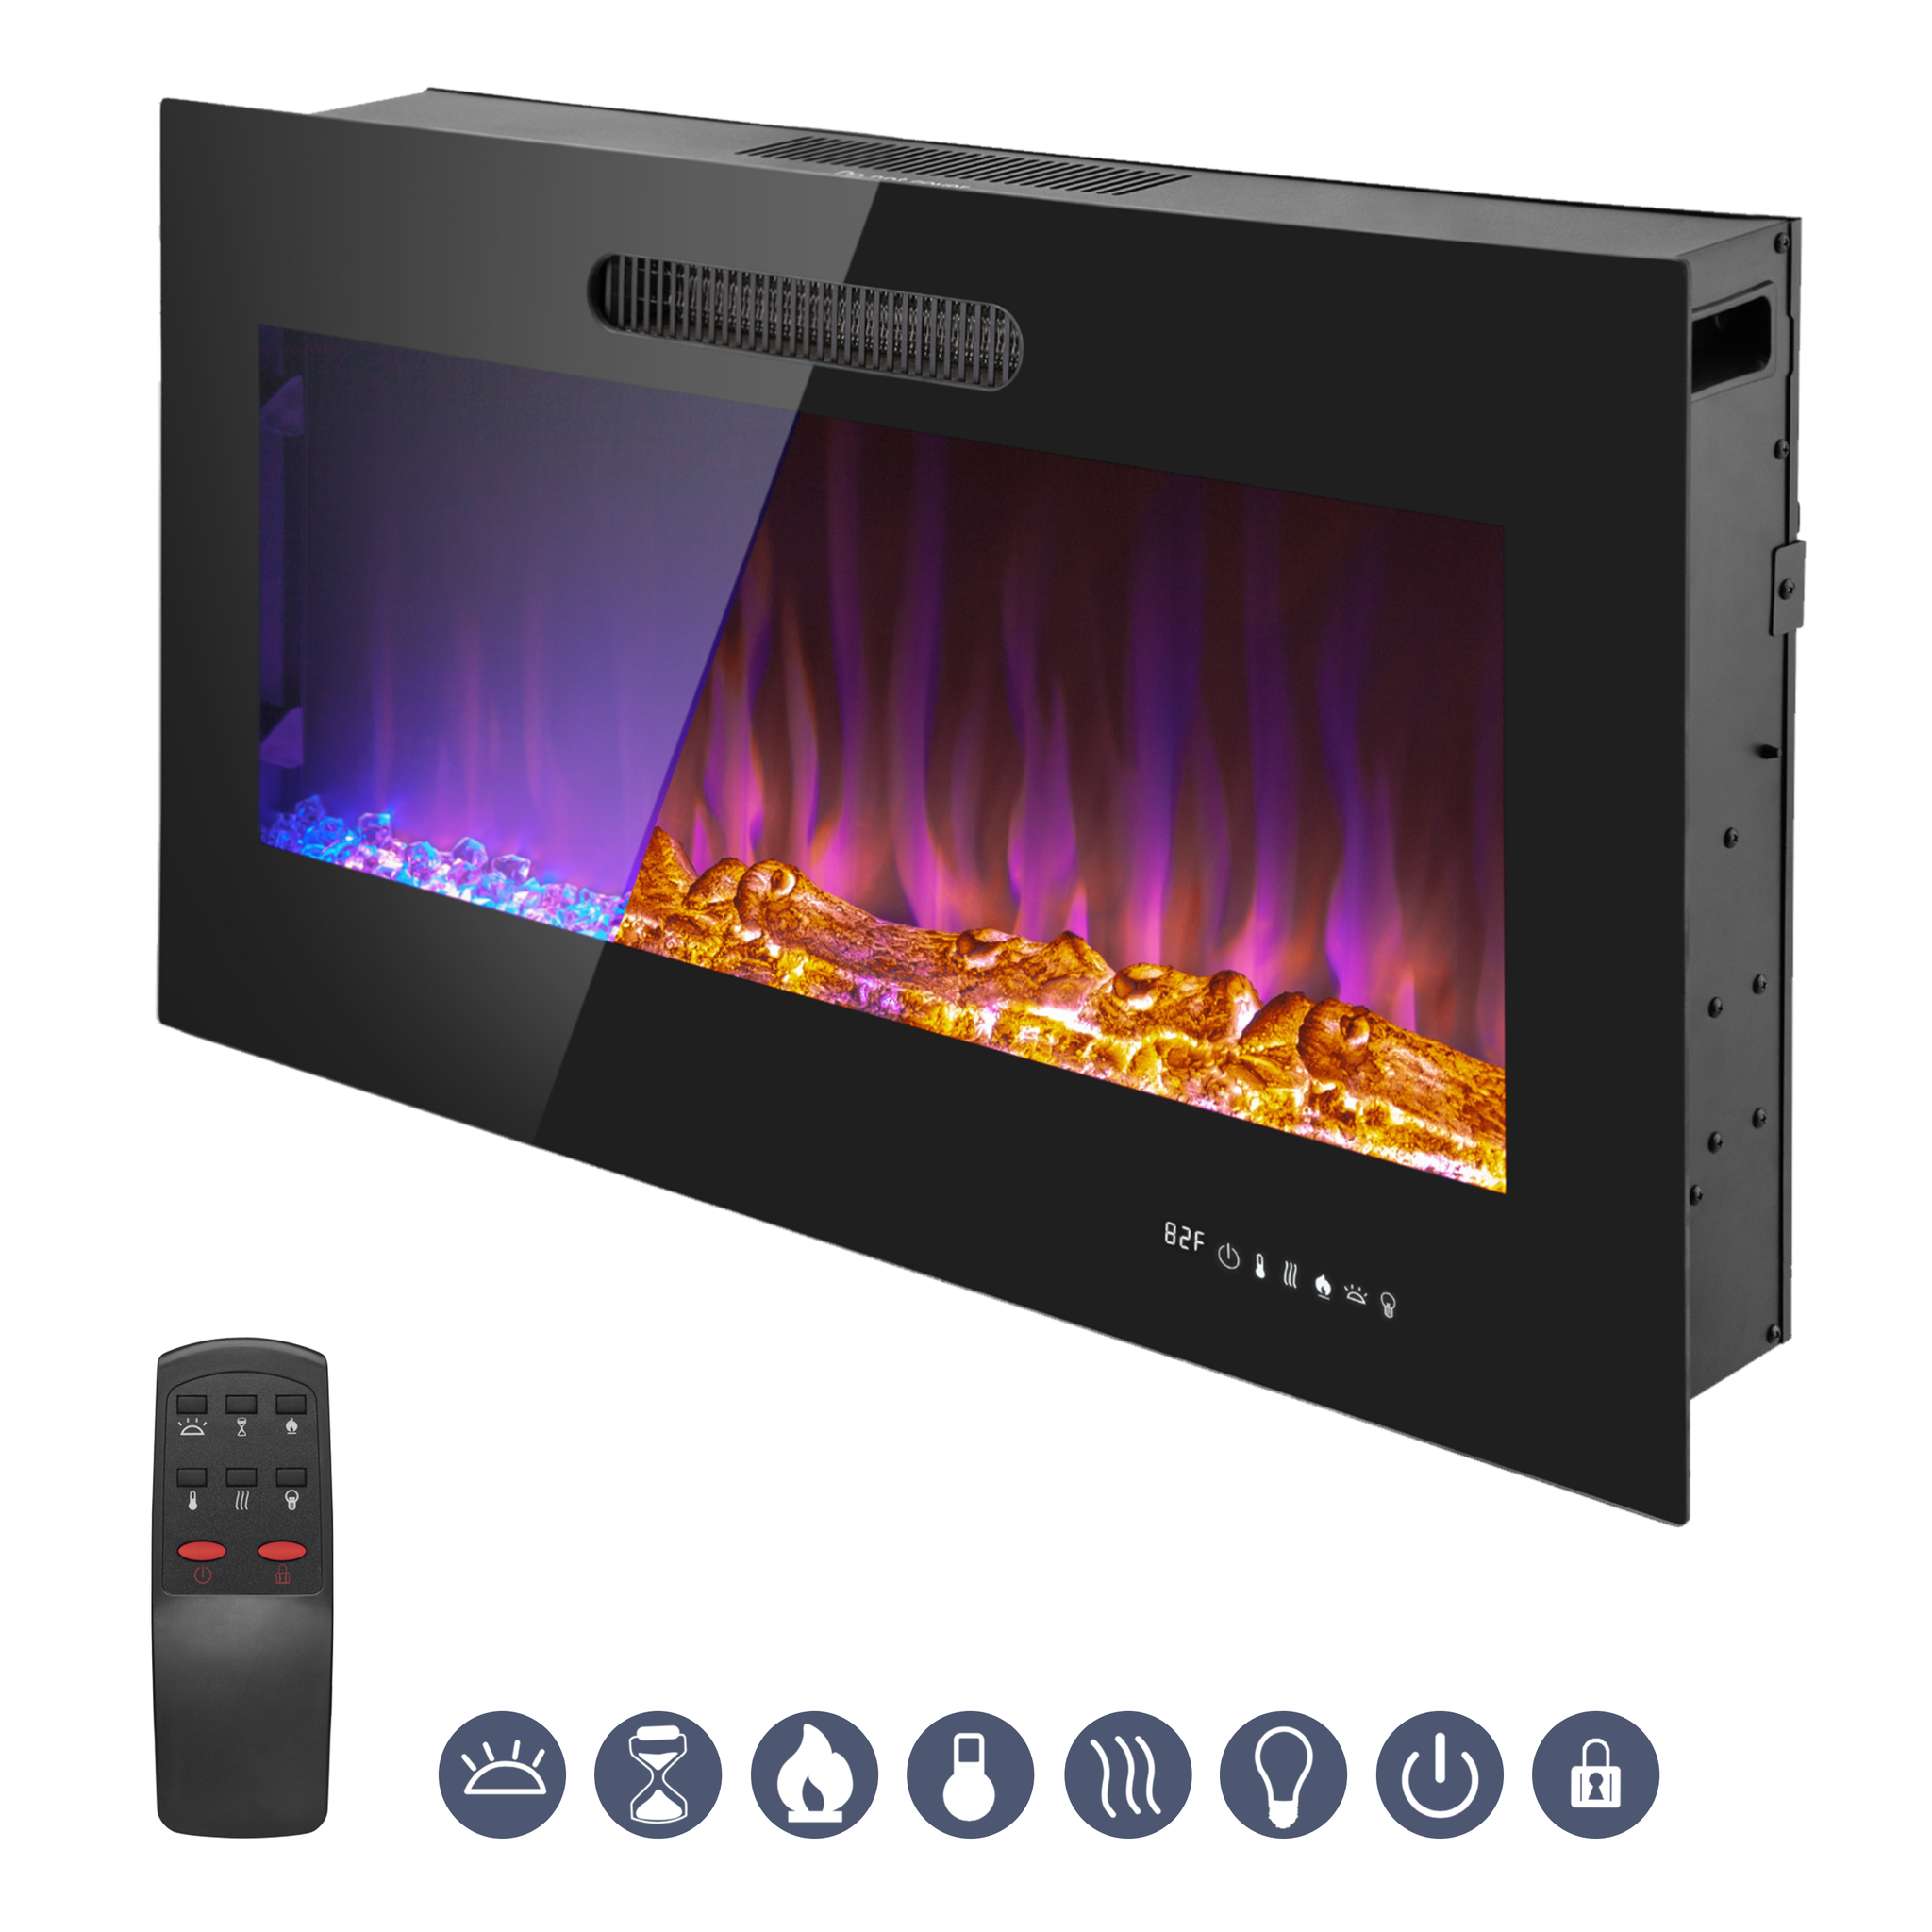 36 Inch LED Slim Design Electric Fireplace Insert and Wall Mounted Fireplace with 1500 Watt Heater, Log & Crystal Ember Options, Adjustable Realistic Flame and Remote Control Default Title by Prominence Home